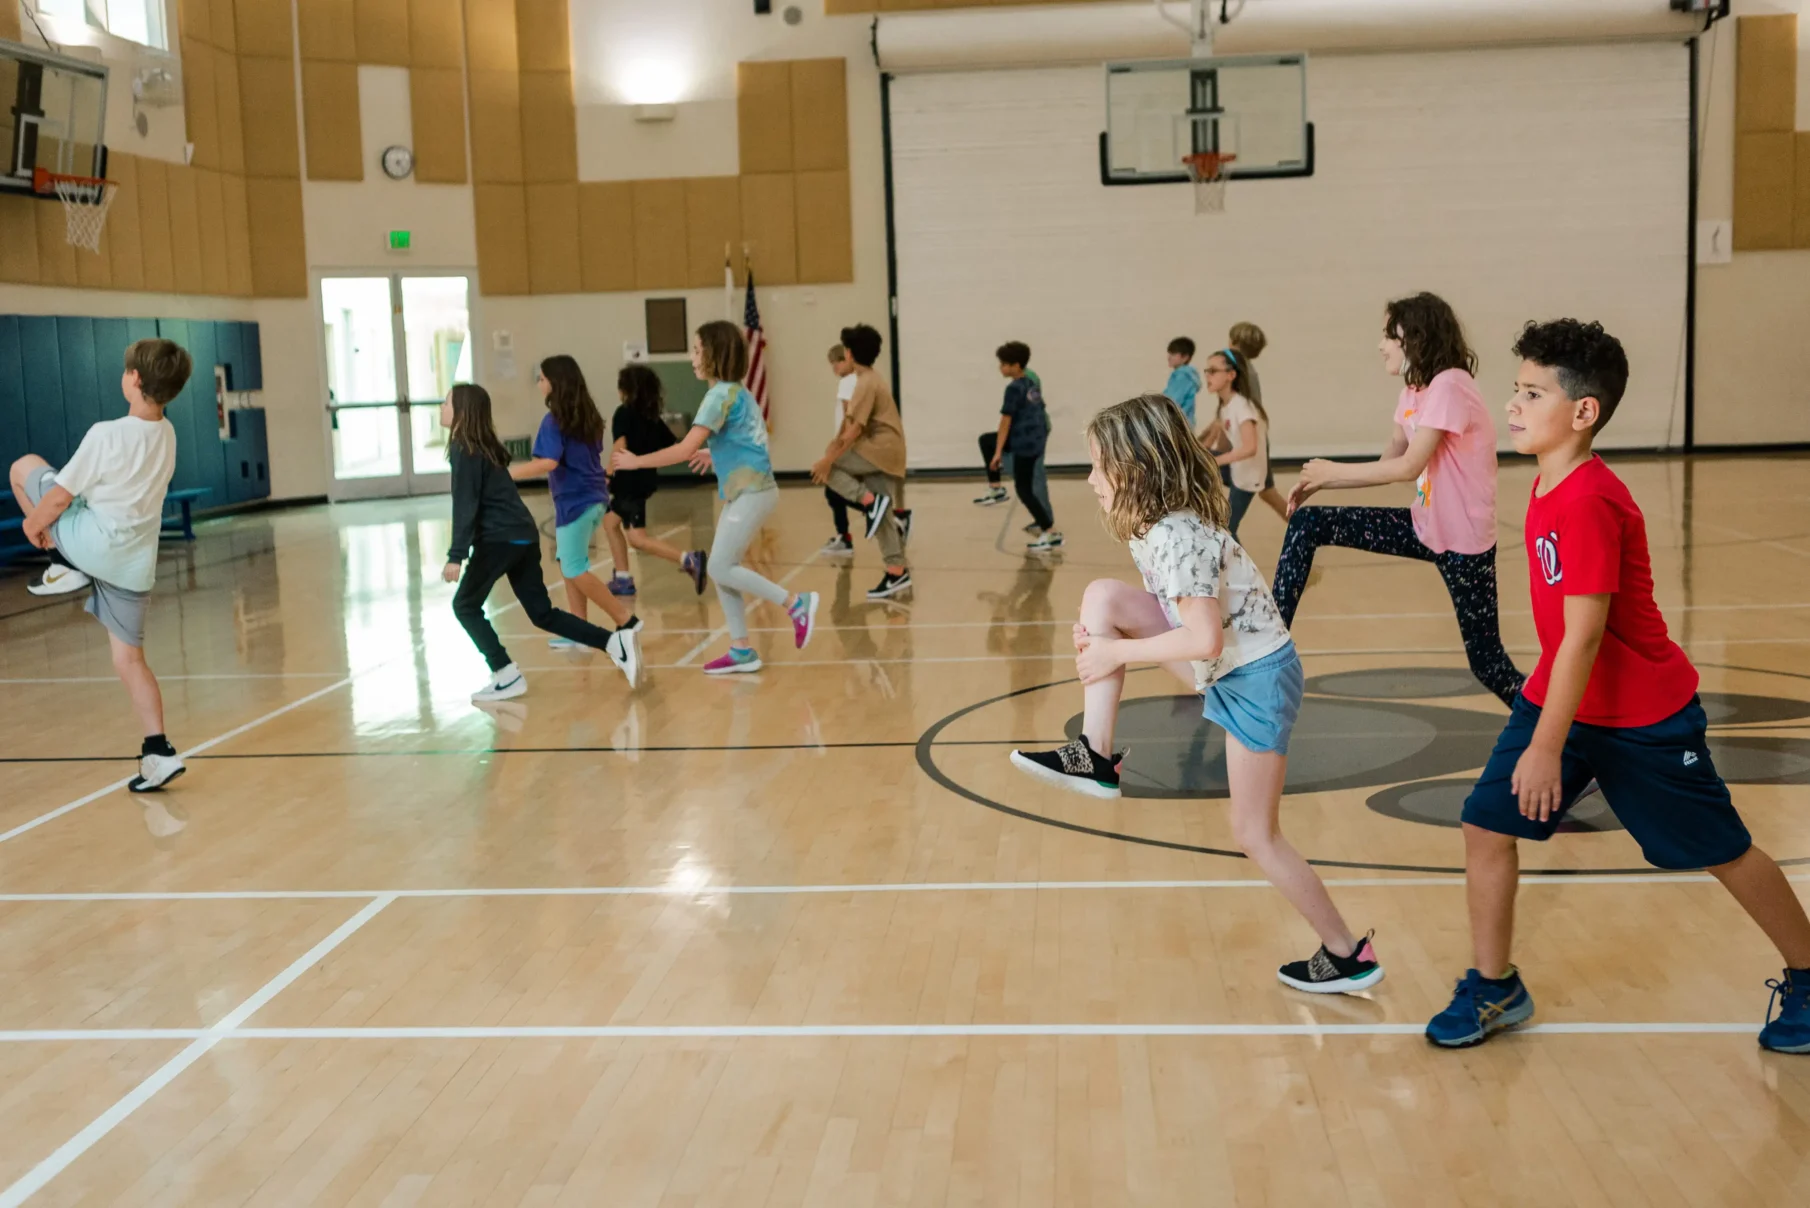 Physical Education in the gym